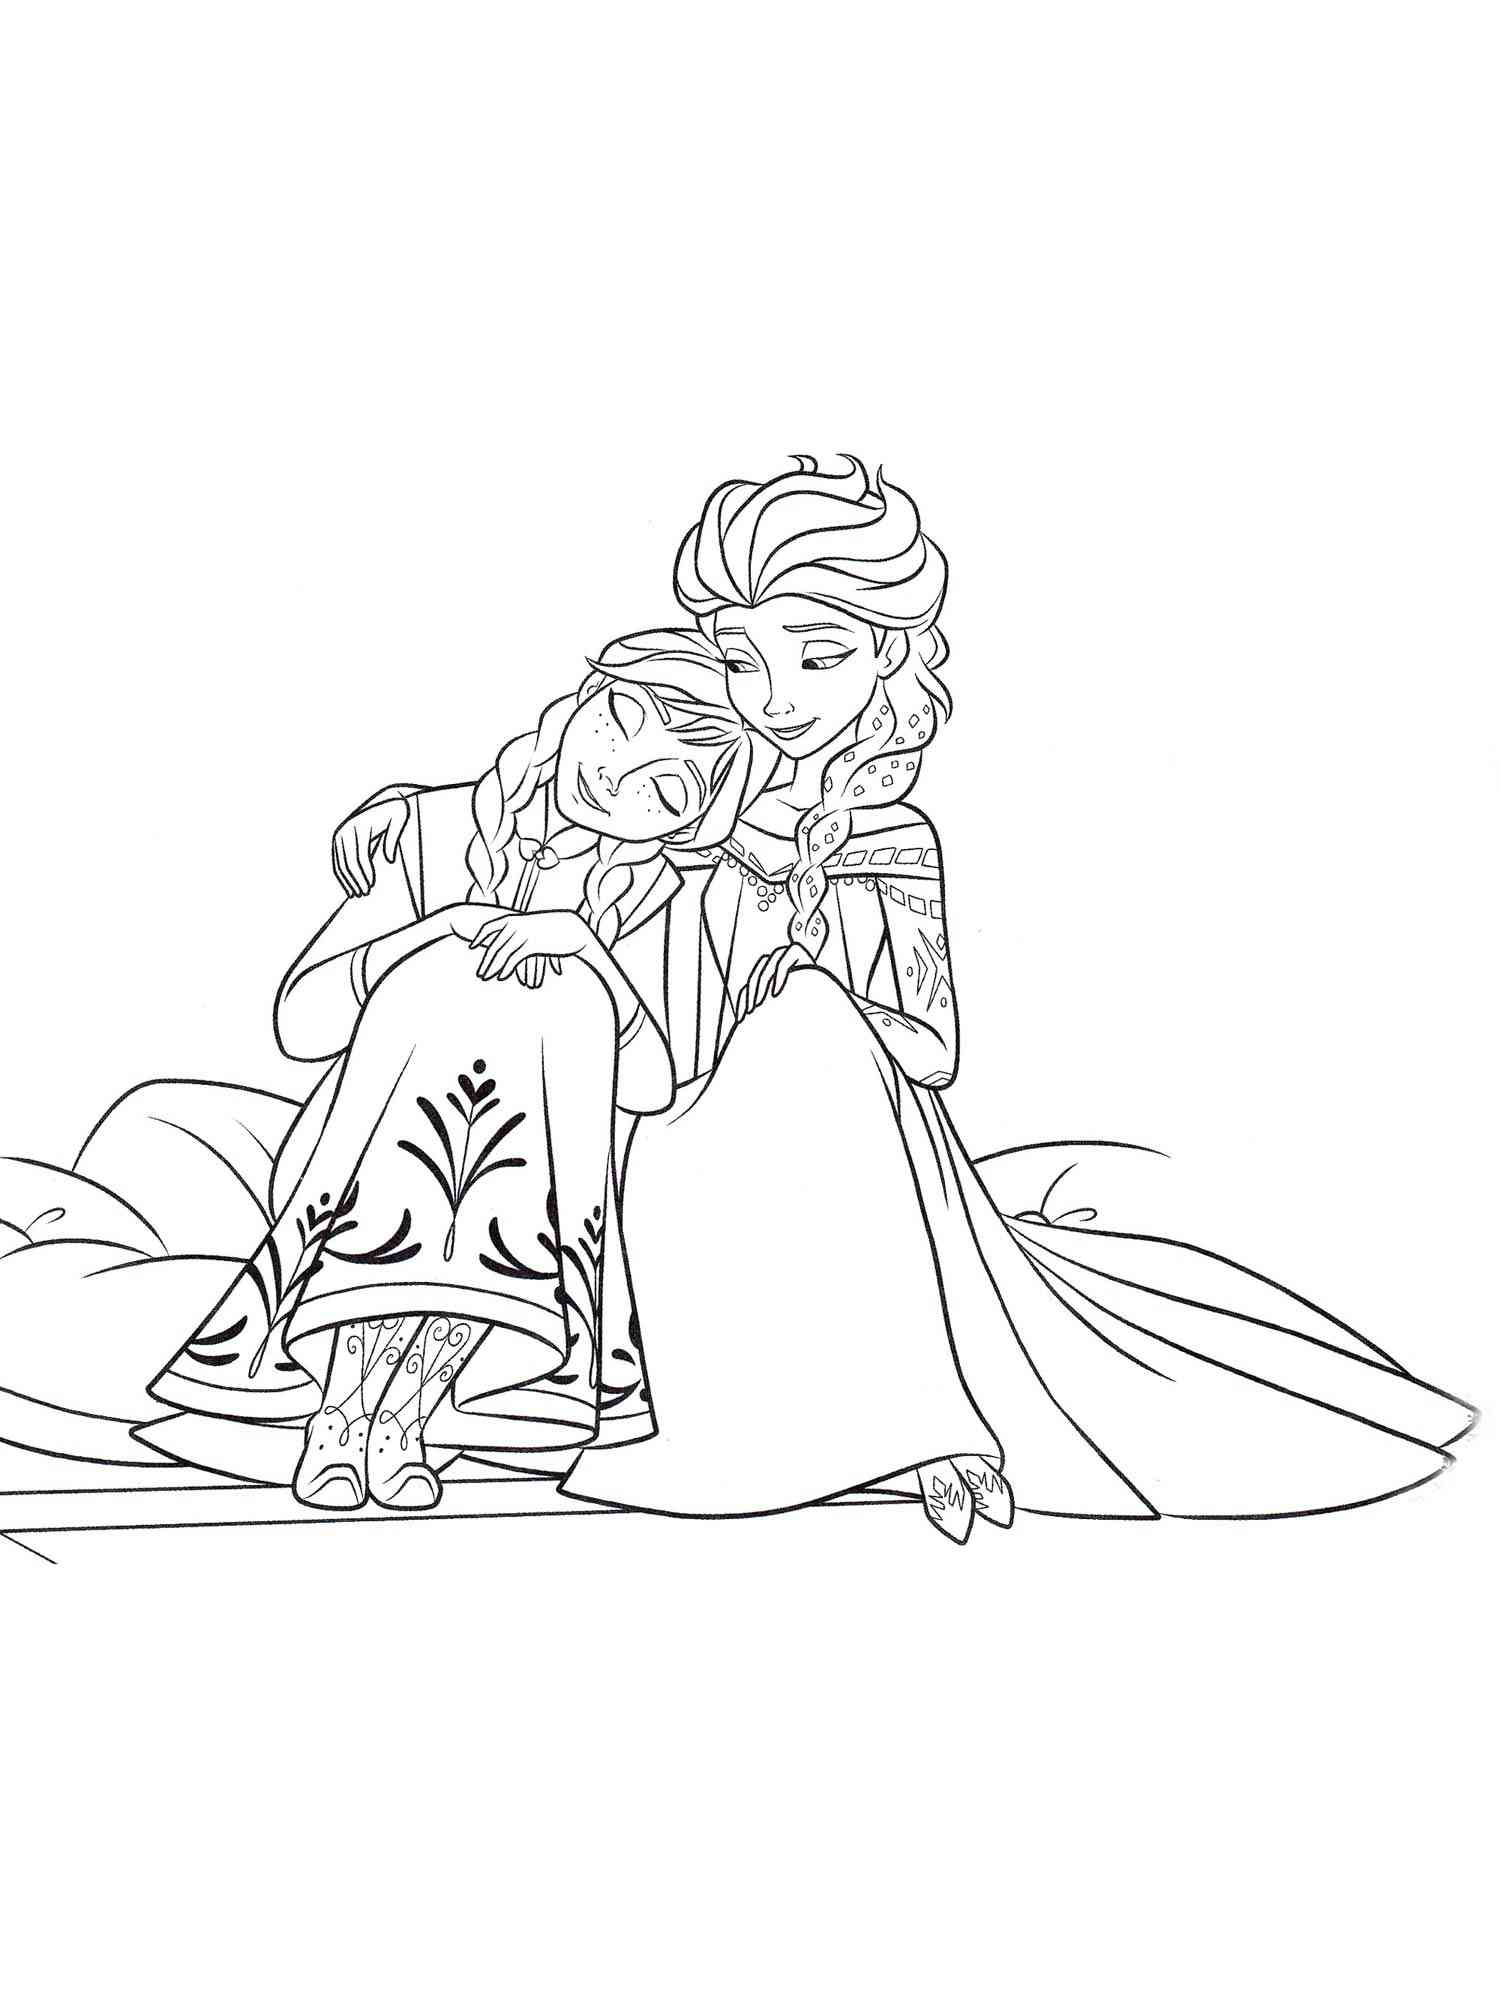 Elsa and Anna 15 coloring page